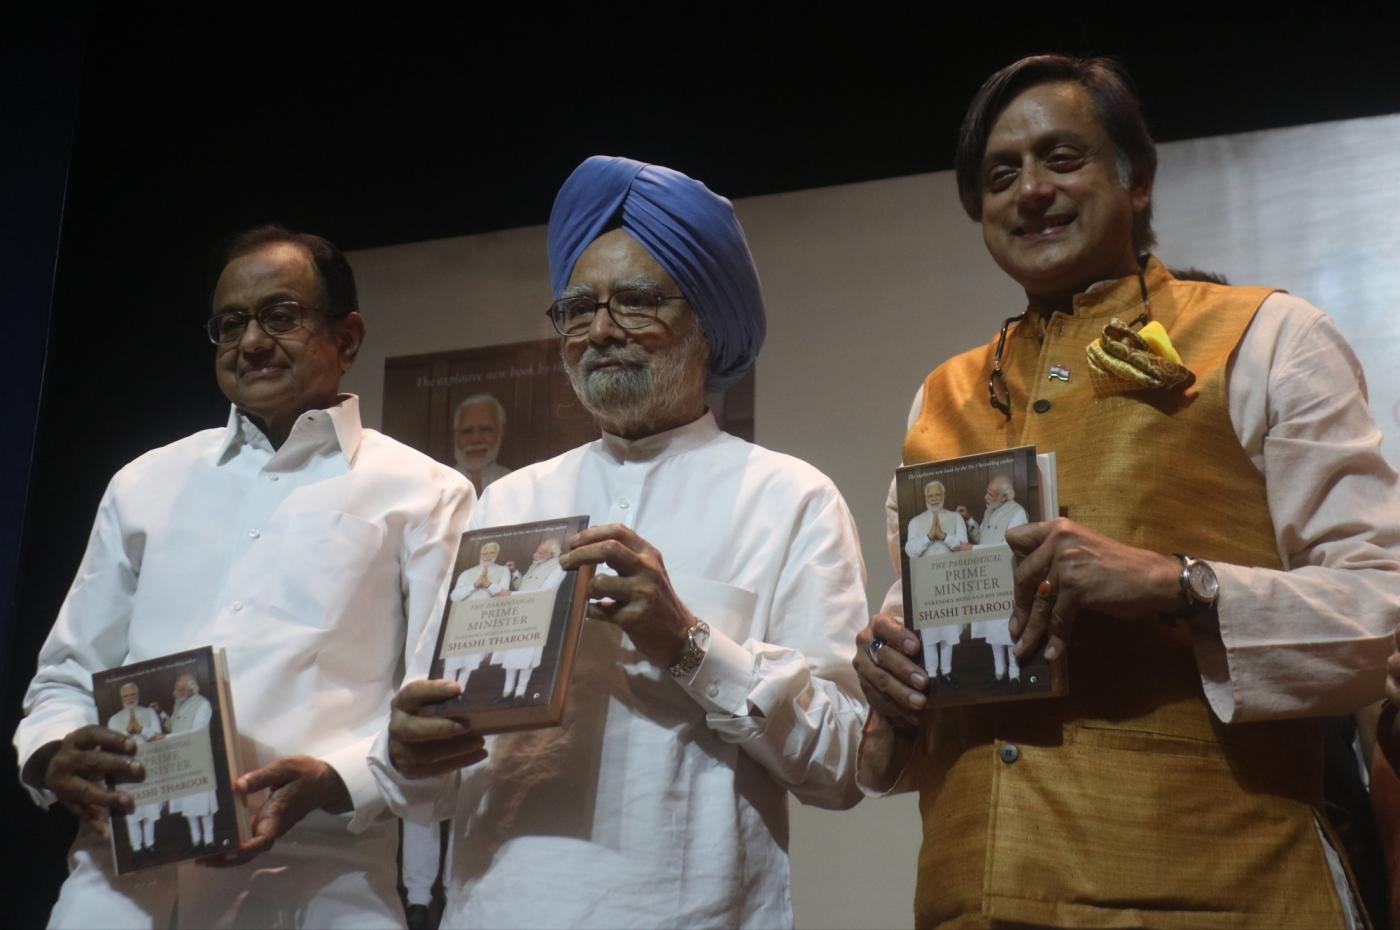 New Delhi: Congress leaders Dr. Manmohan Singh and P. Chidambaram at the launch of Shashi Tharoor's book "The Paradoxical Prime Minister: Narendra Modi And His India" in New Delhi on Oct 26, 2018. (Photo: IANS) by .